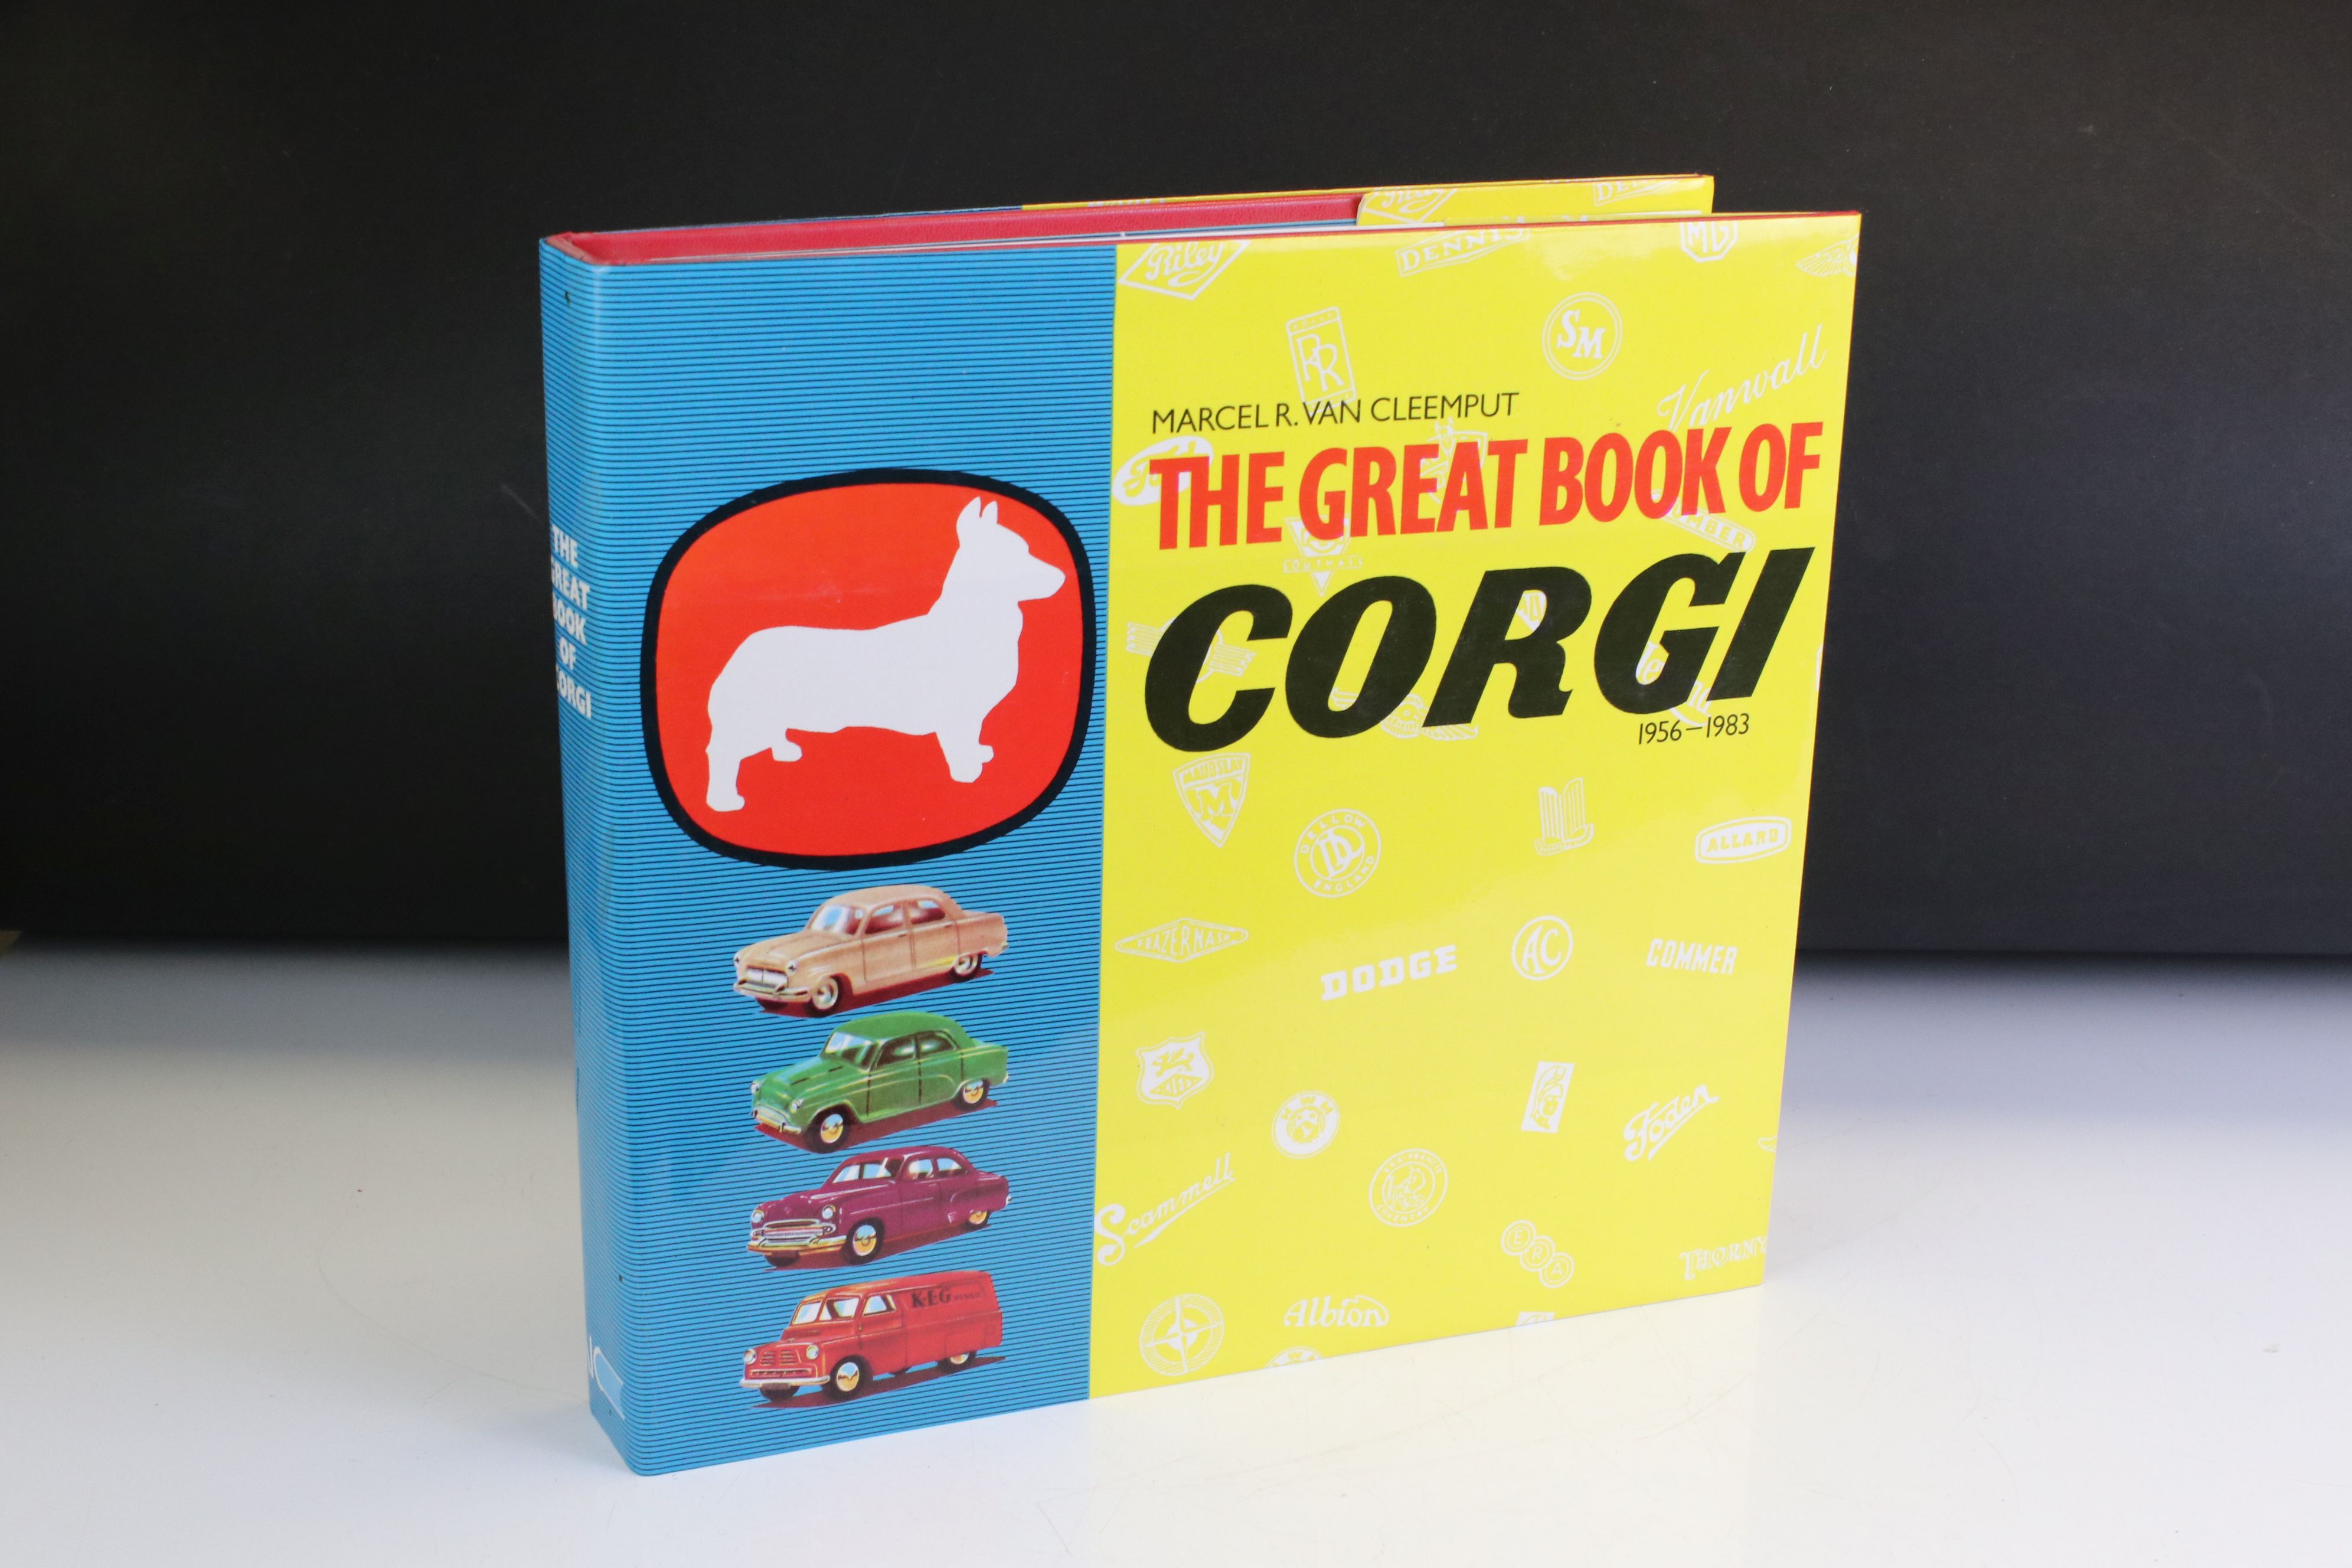 The Great Book Of Corgi 1956-1983 hardback reference book - by Marcel Van Cleemput - 1989 First - Image 15 of 20